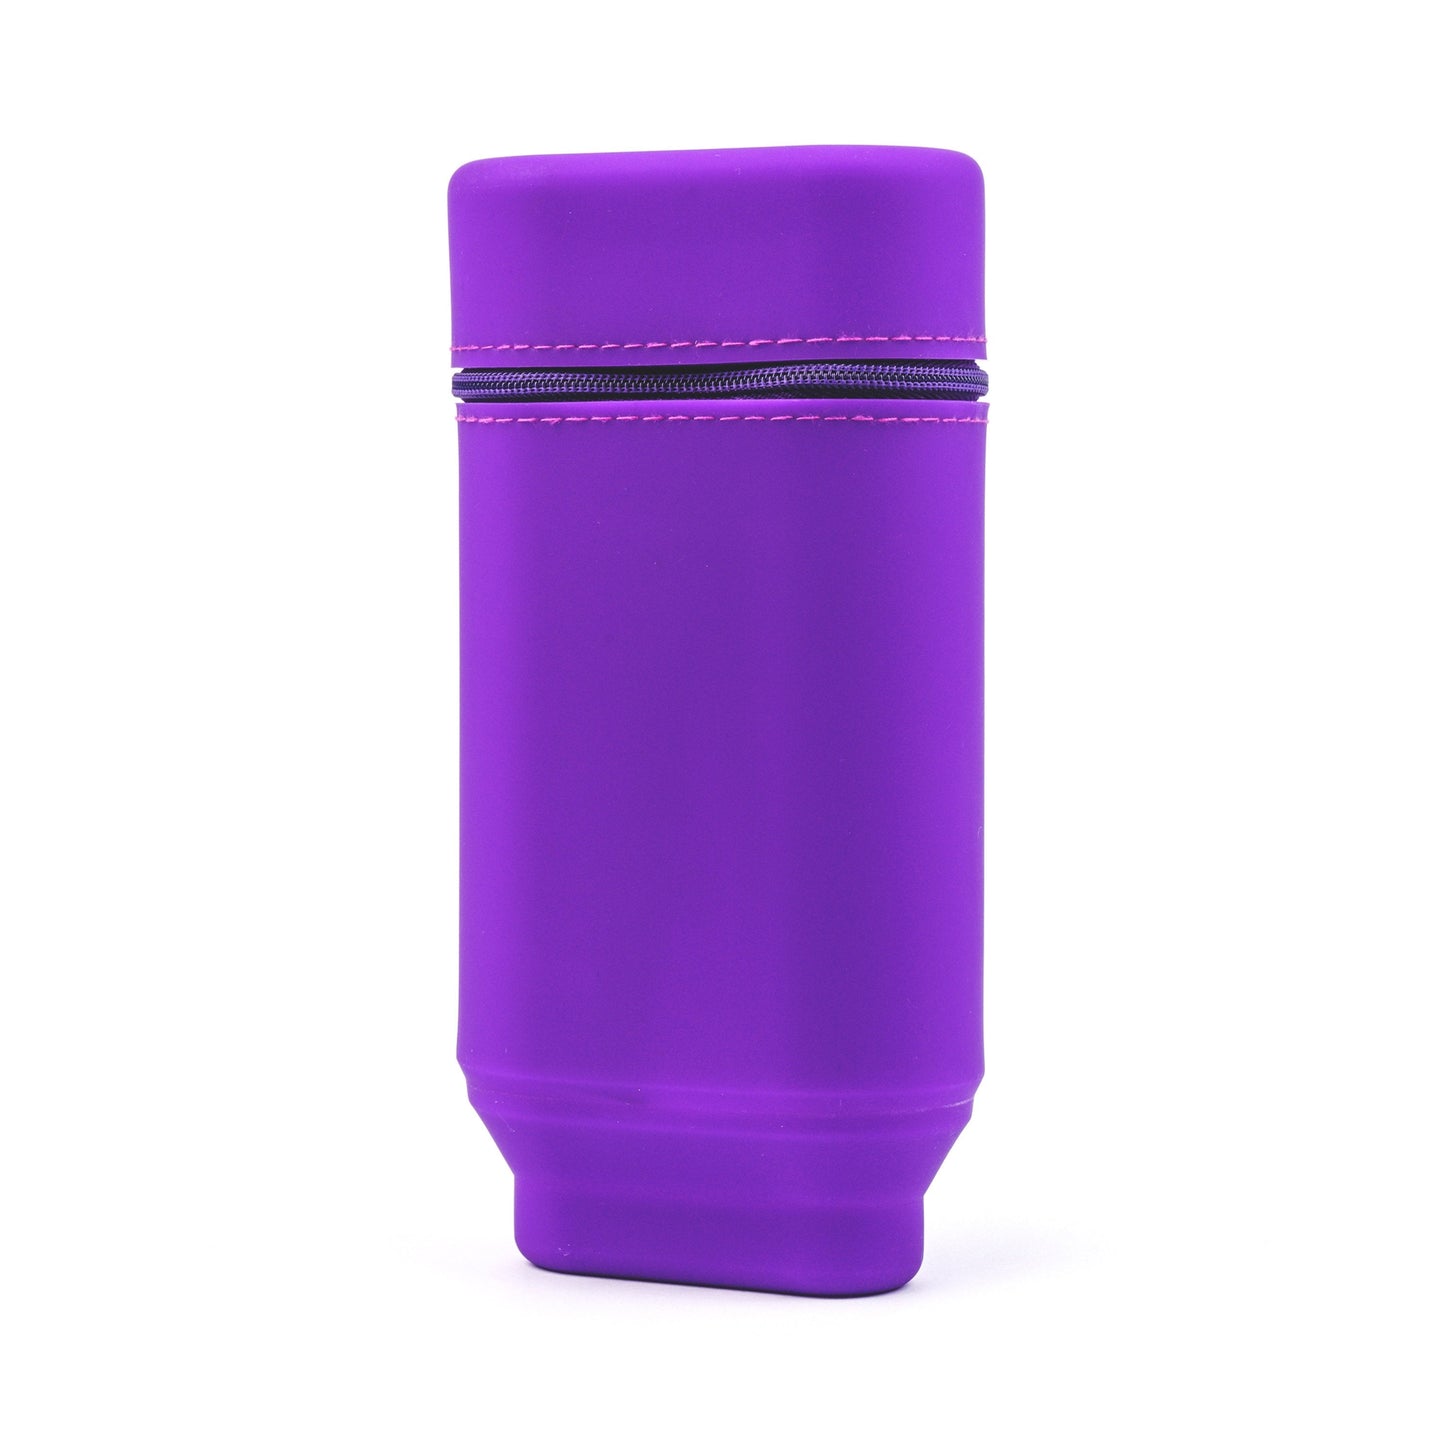 Whippy Expandable Silicone Pencil Case - Royal Mess Purple